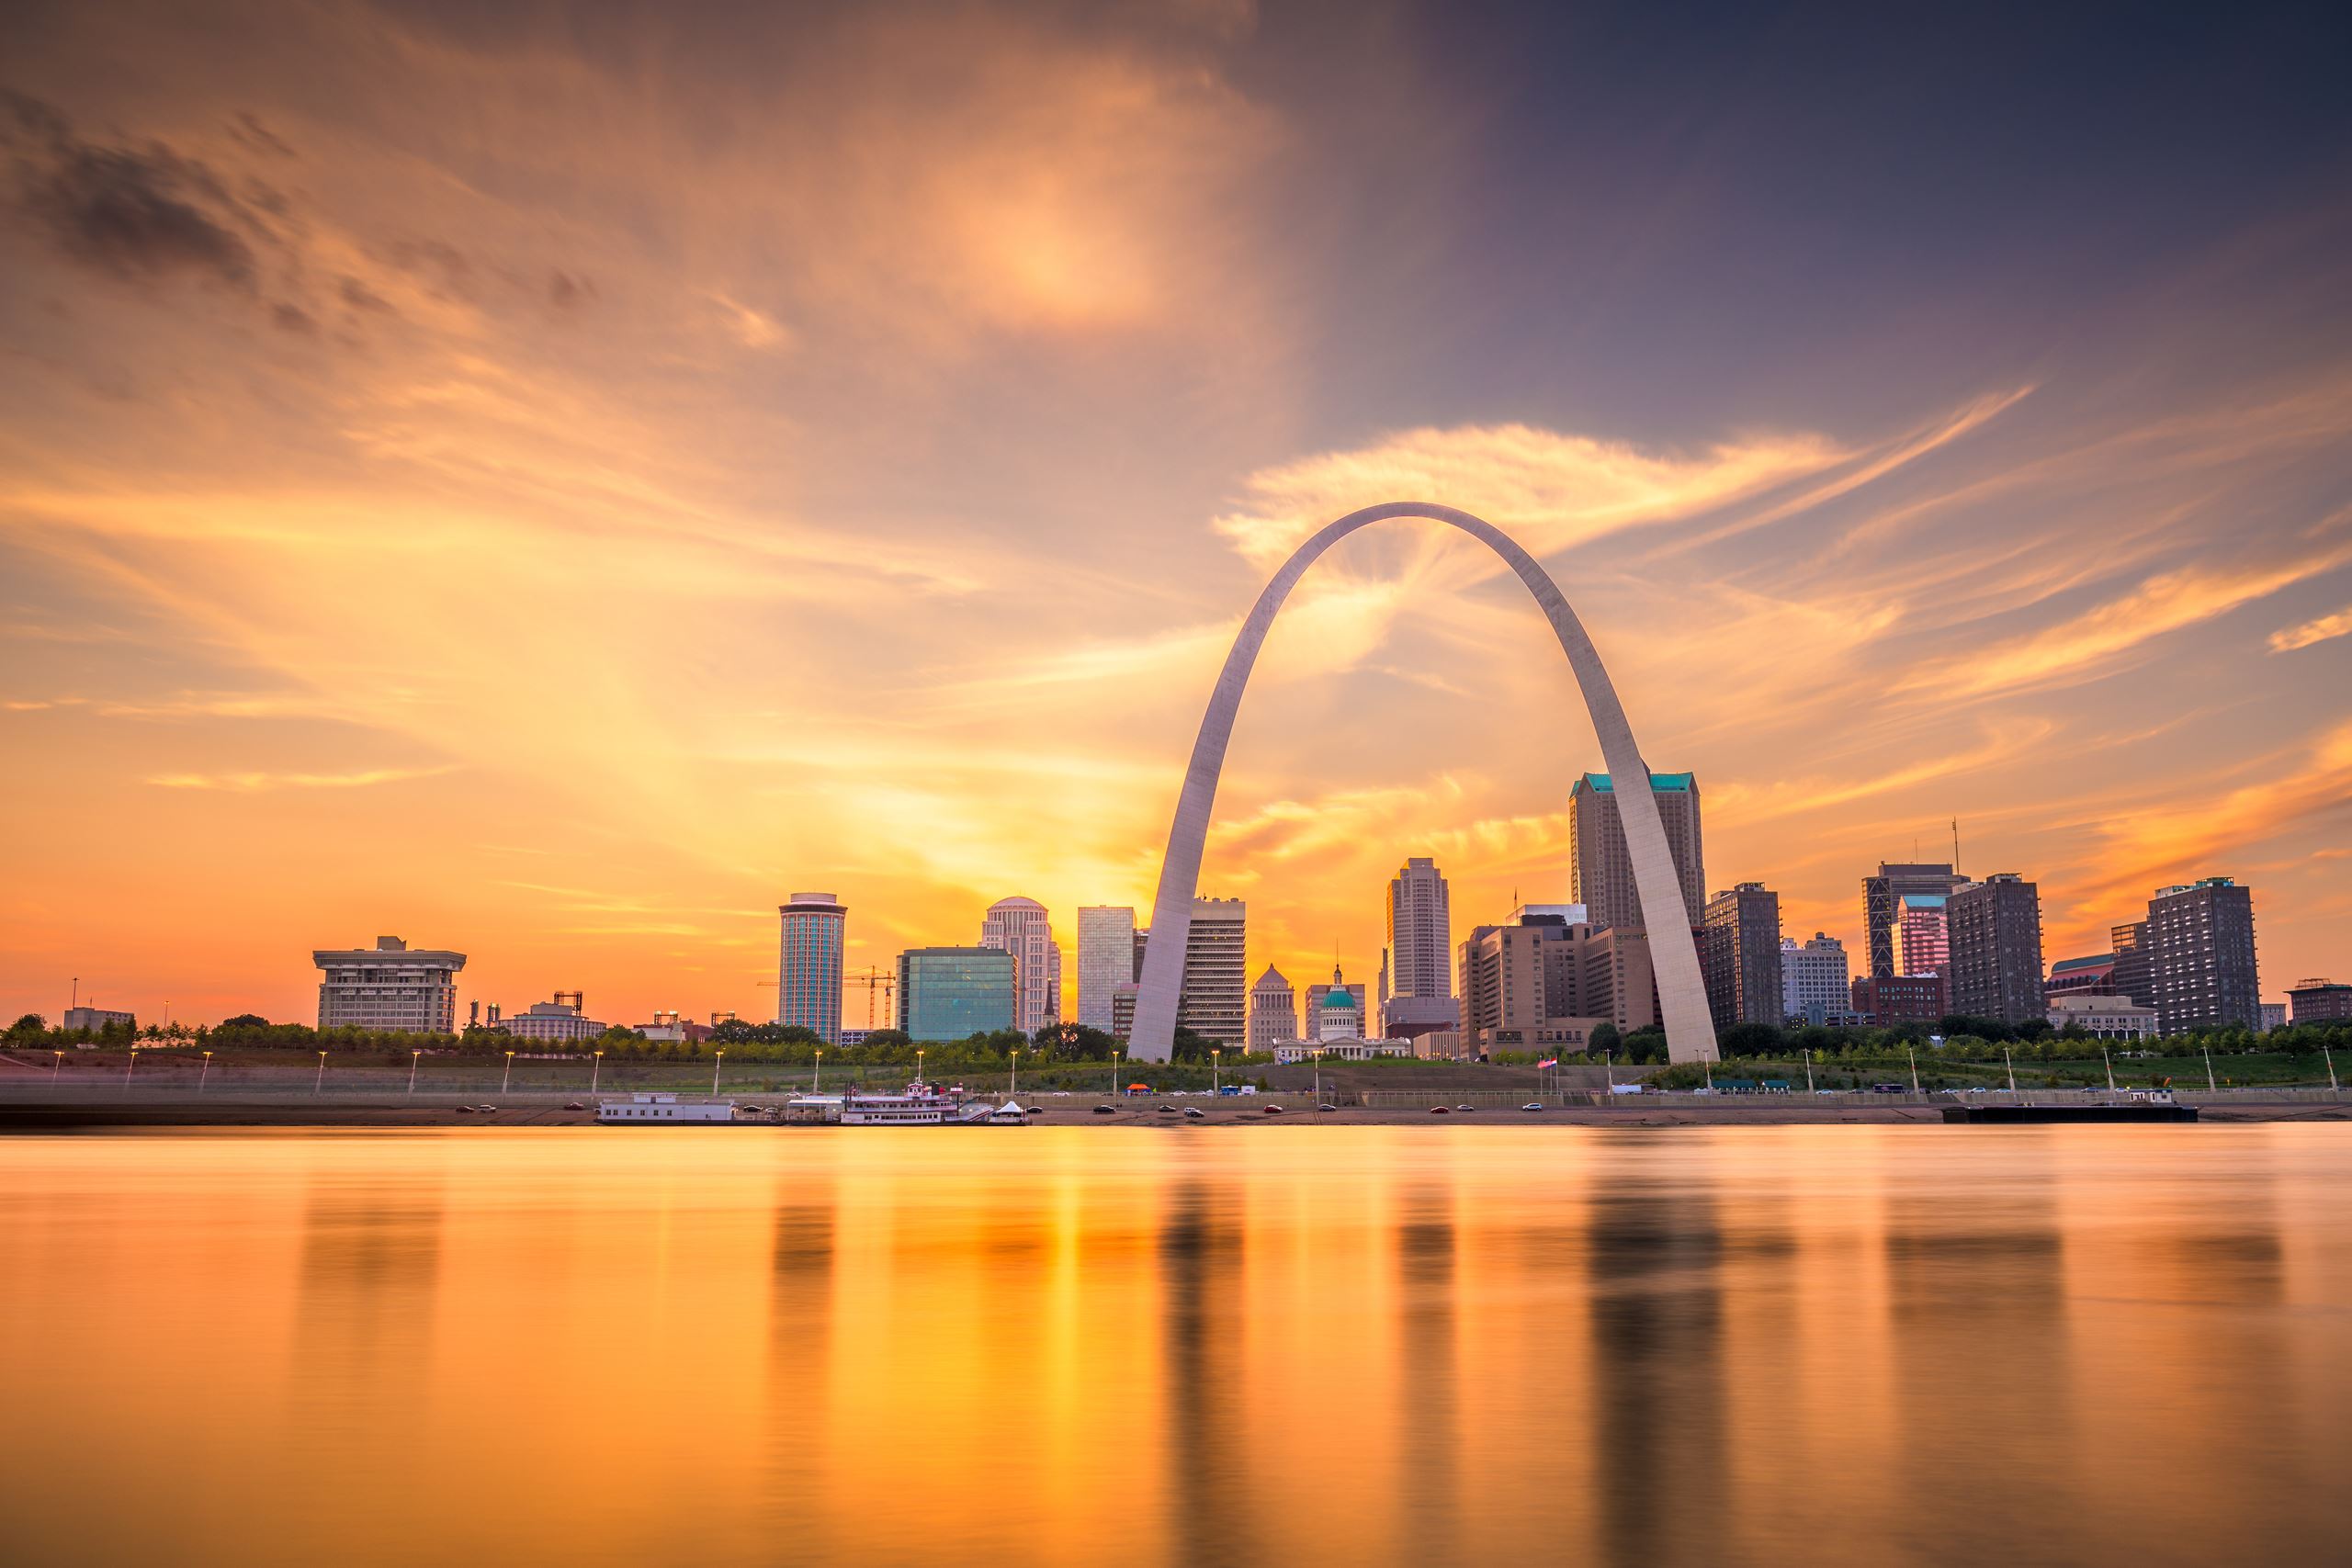 St. Louis At Sunset